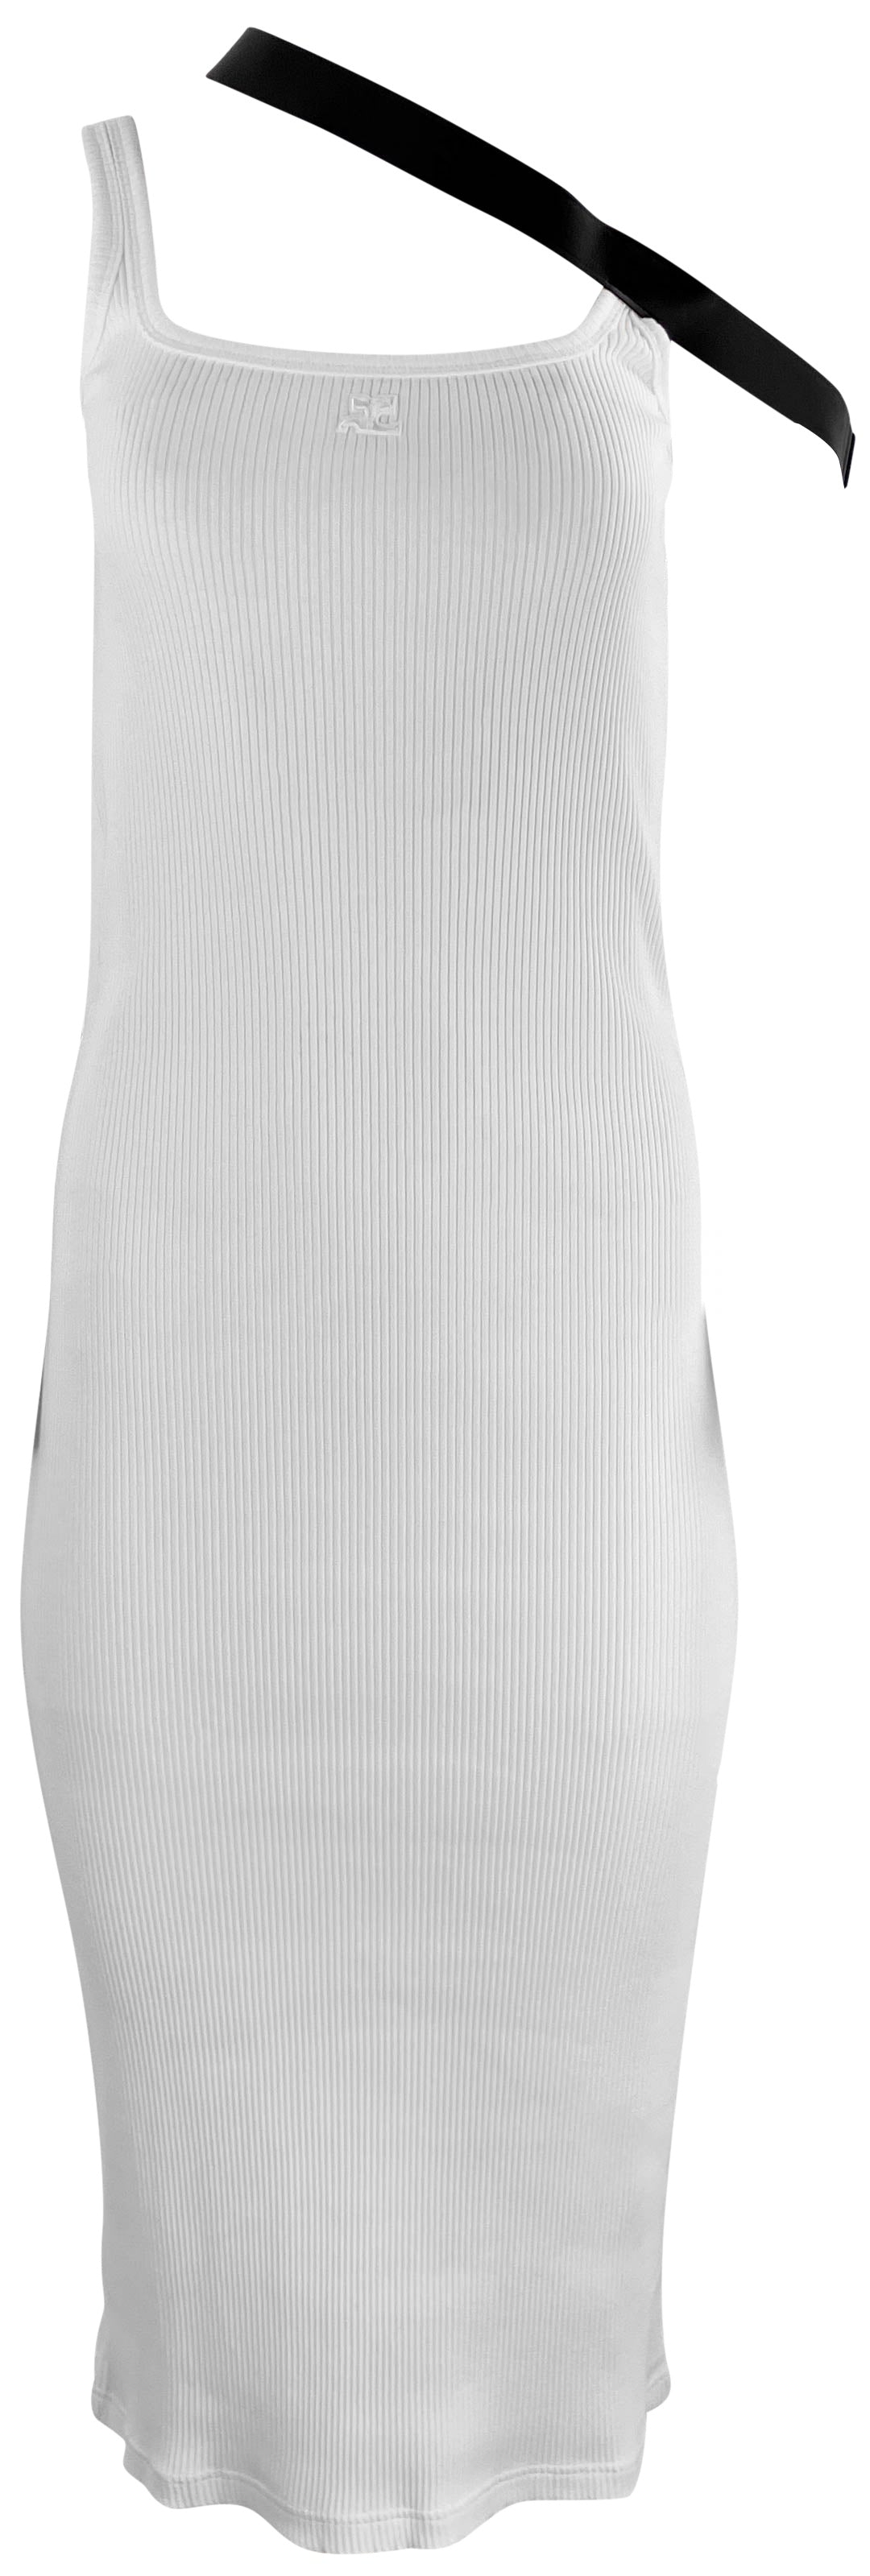 Courrēges Bias Strap 90s Rib-Knit Dress in Cream - Discounts on Courrēges at UAL